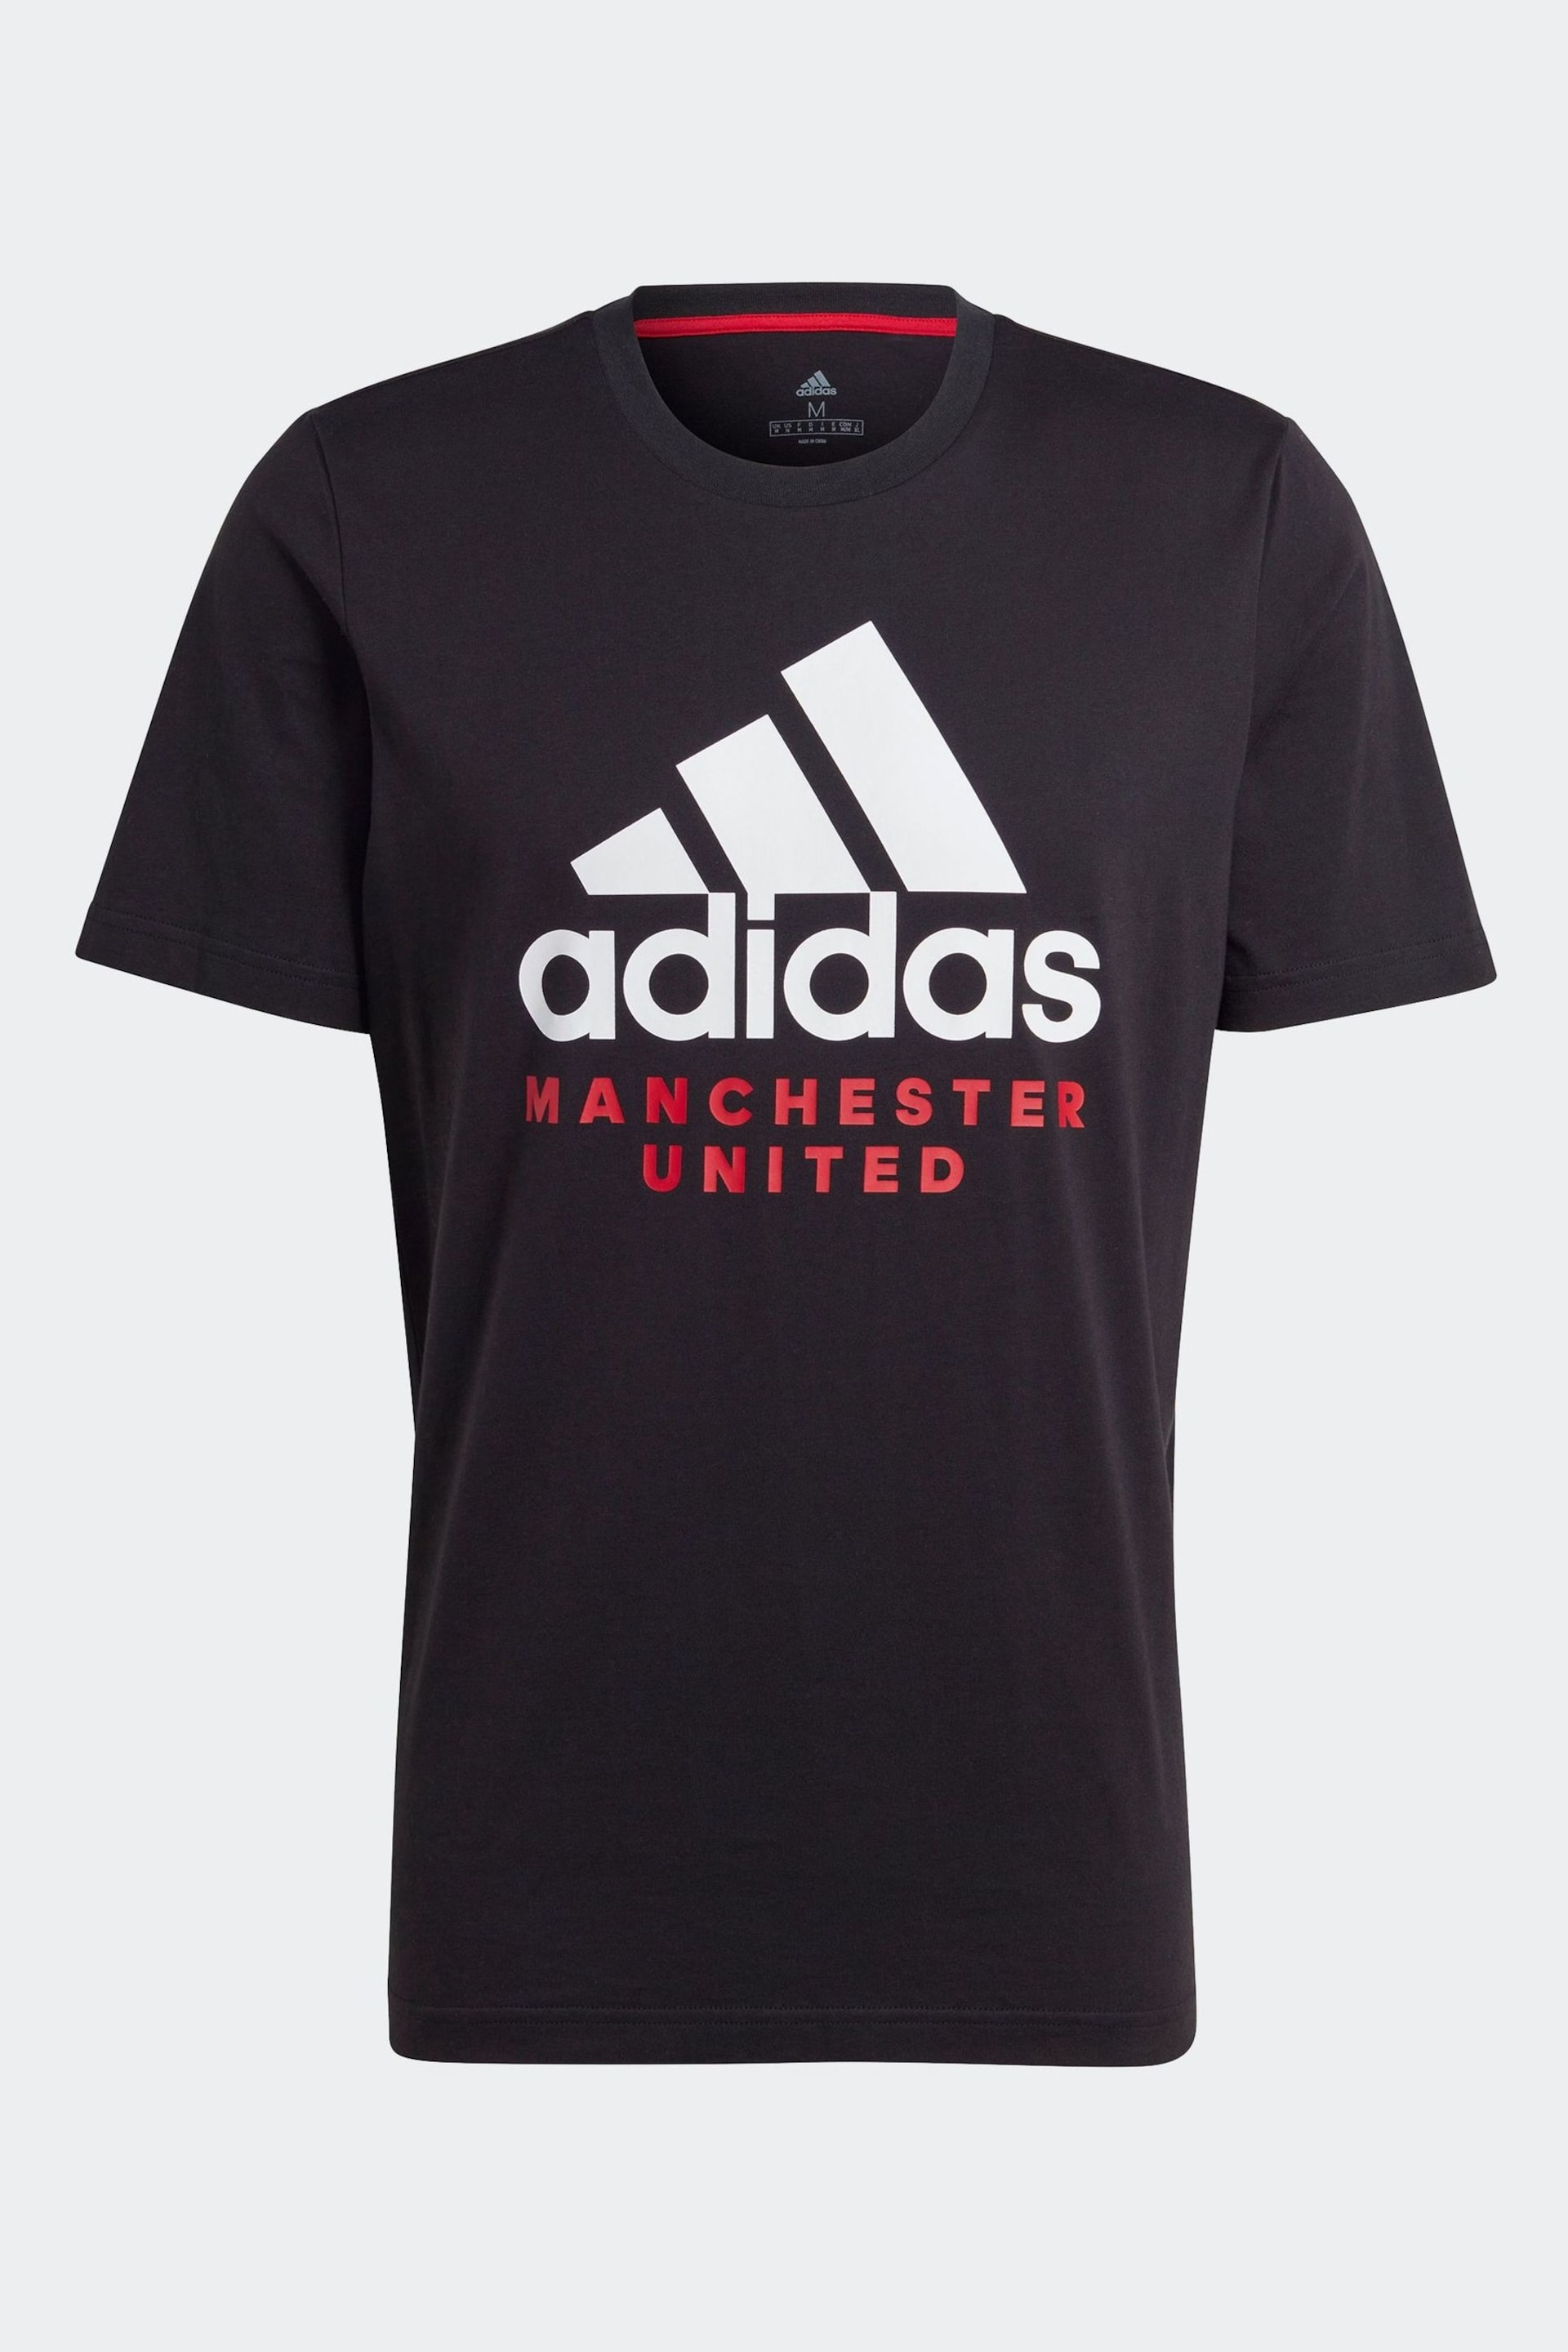 adidas Black Manchester United DNA Graphic T-Shirt - Image 7 of 7